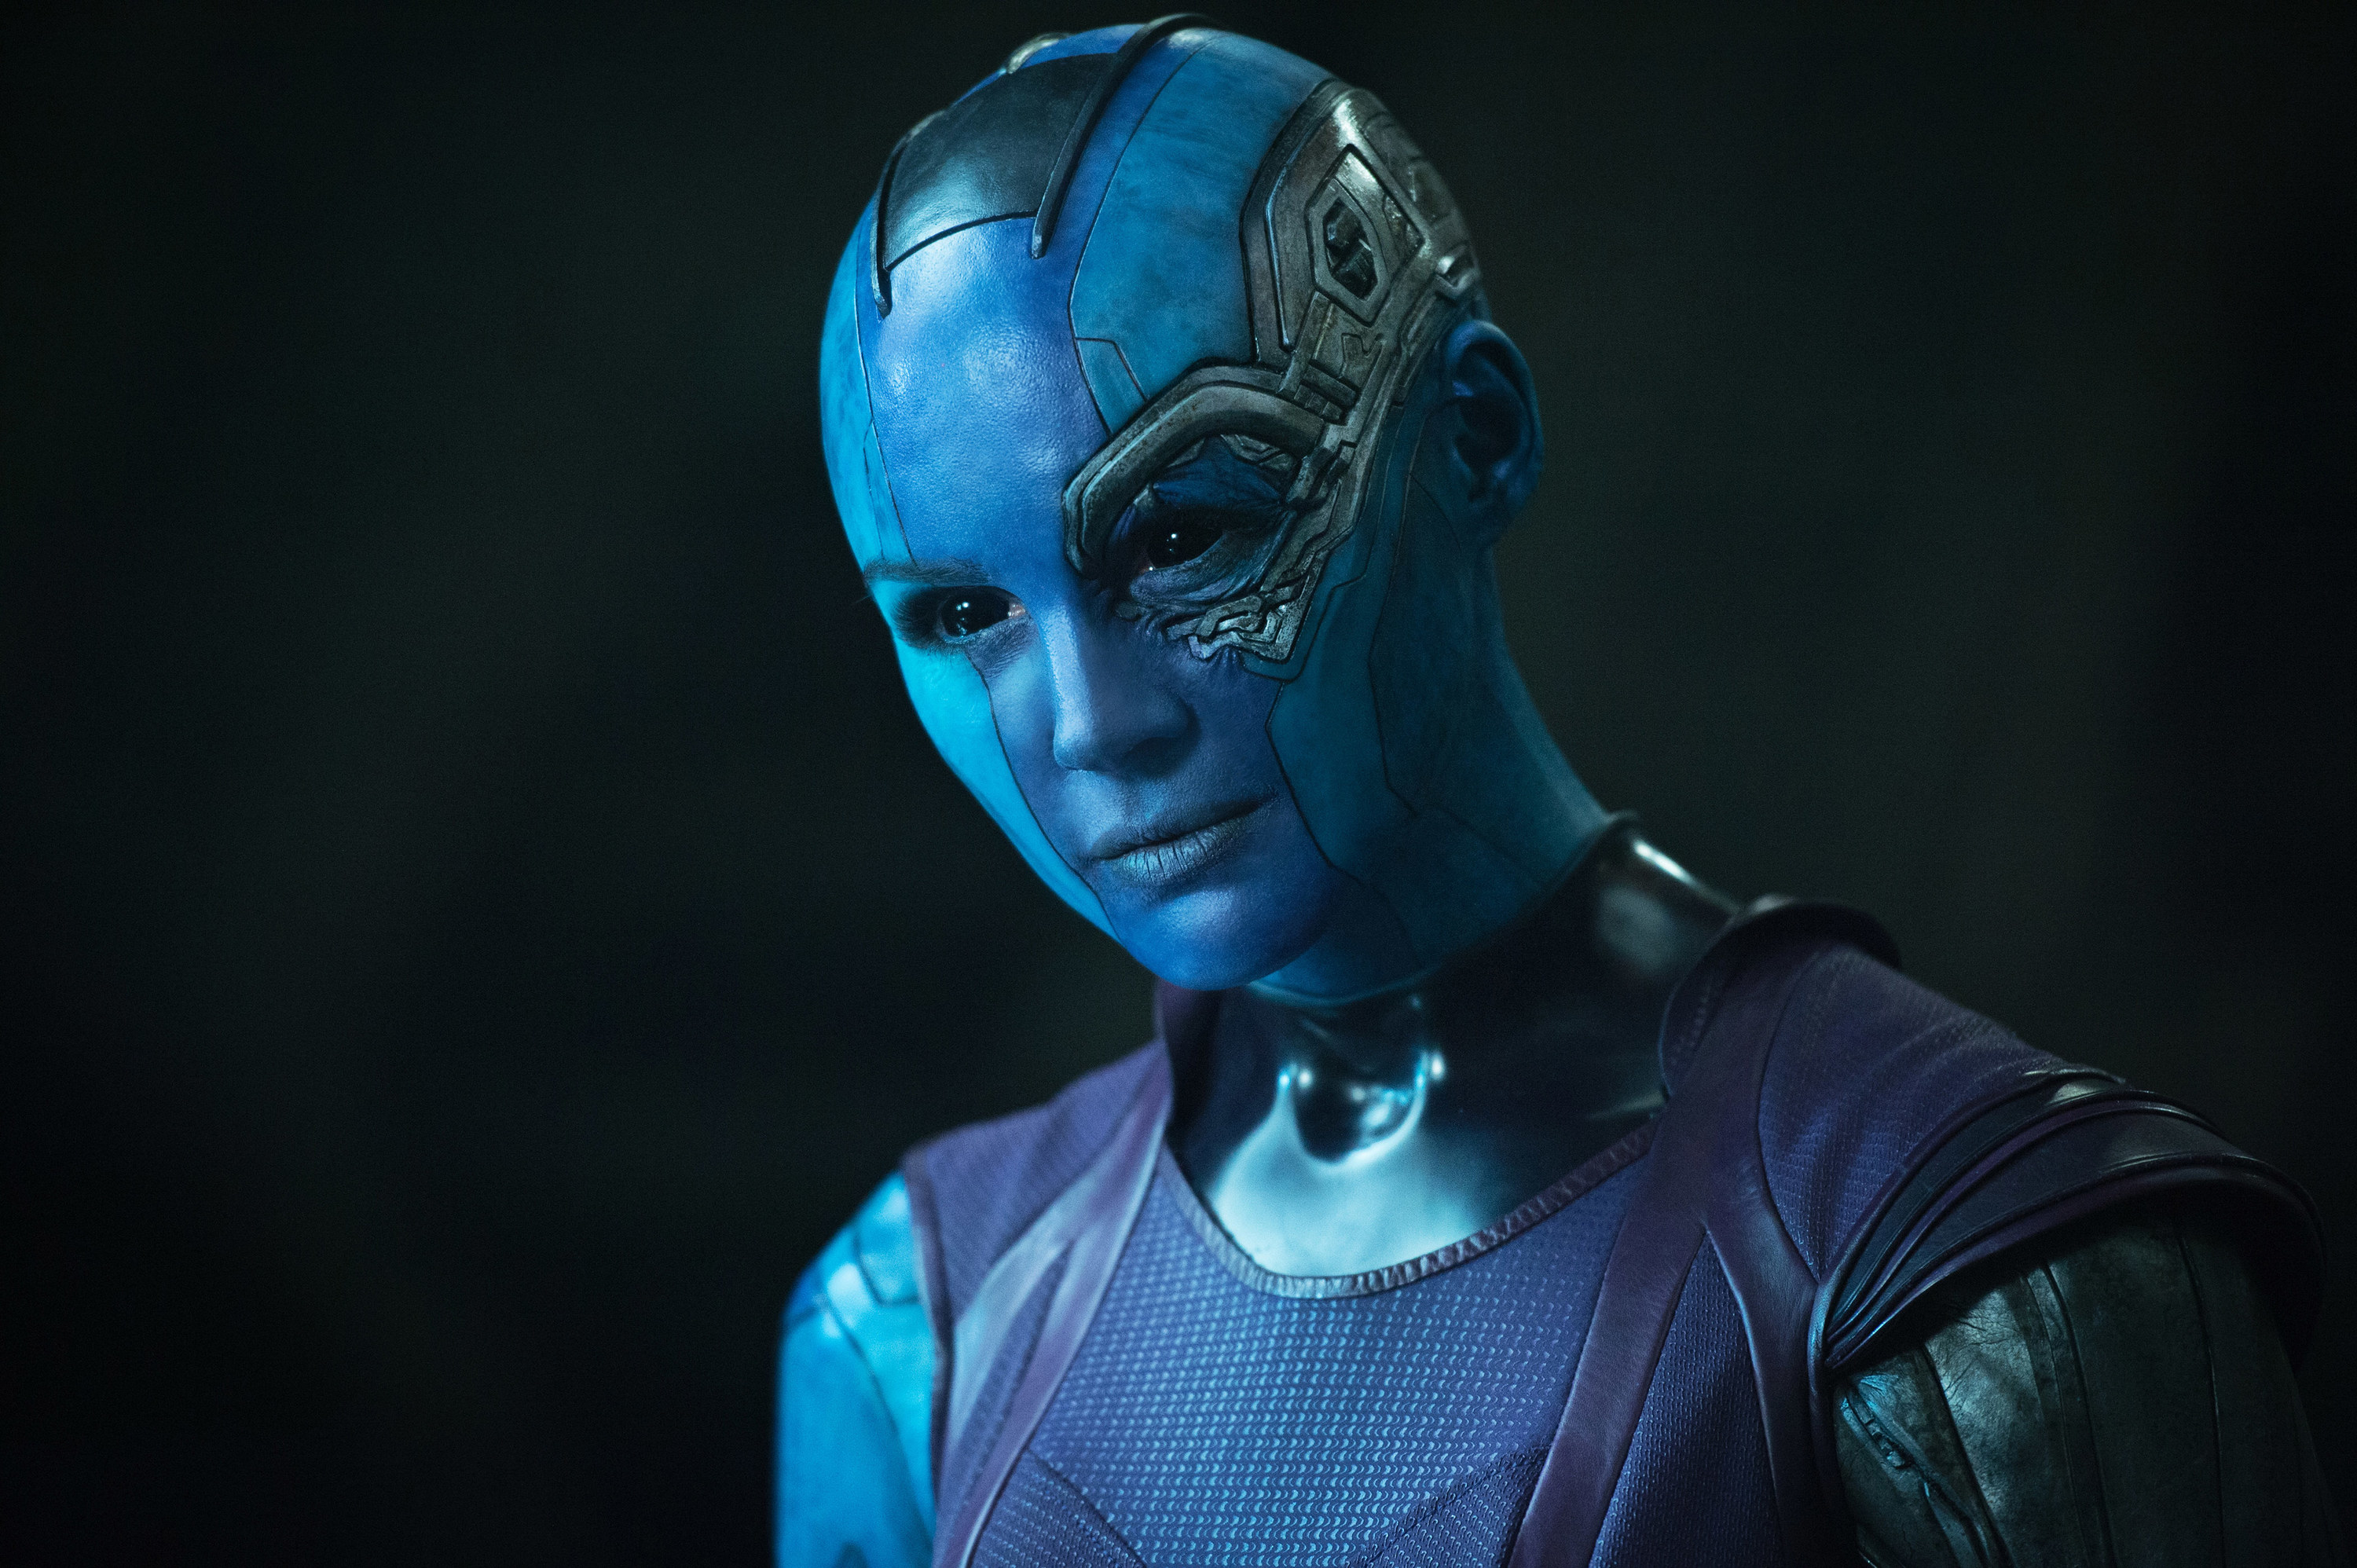 Nebula from the first Guardians movie